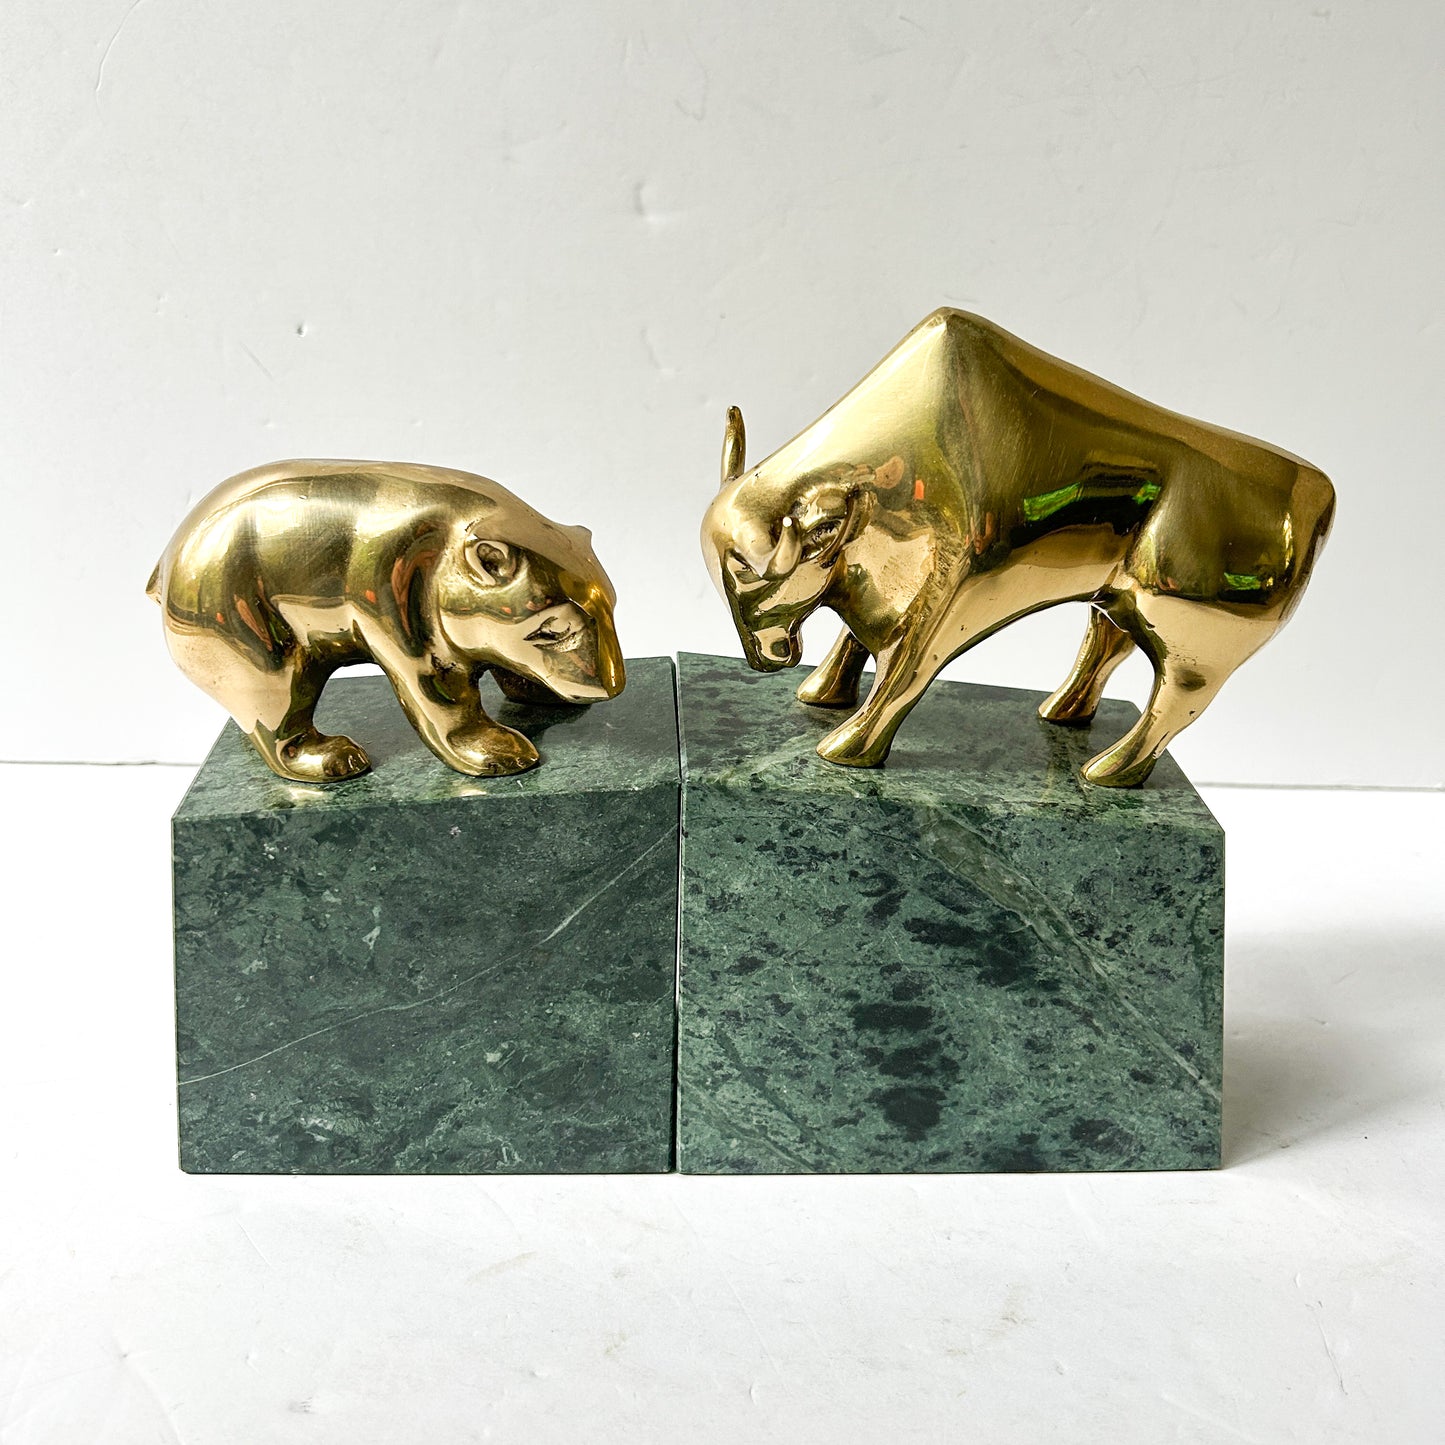 Vintage Brass Bull and Bear Bookends on Marble, Heavy Stock Market Themed Office Decor